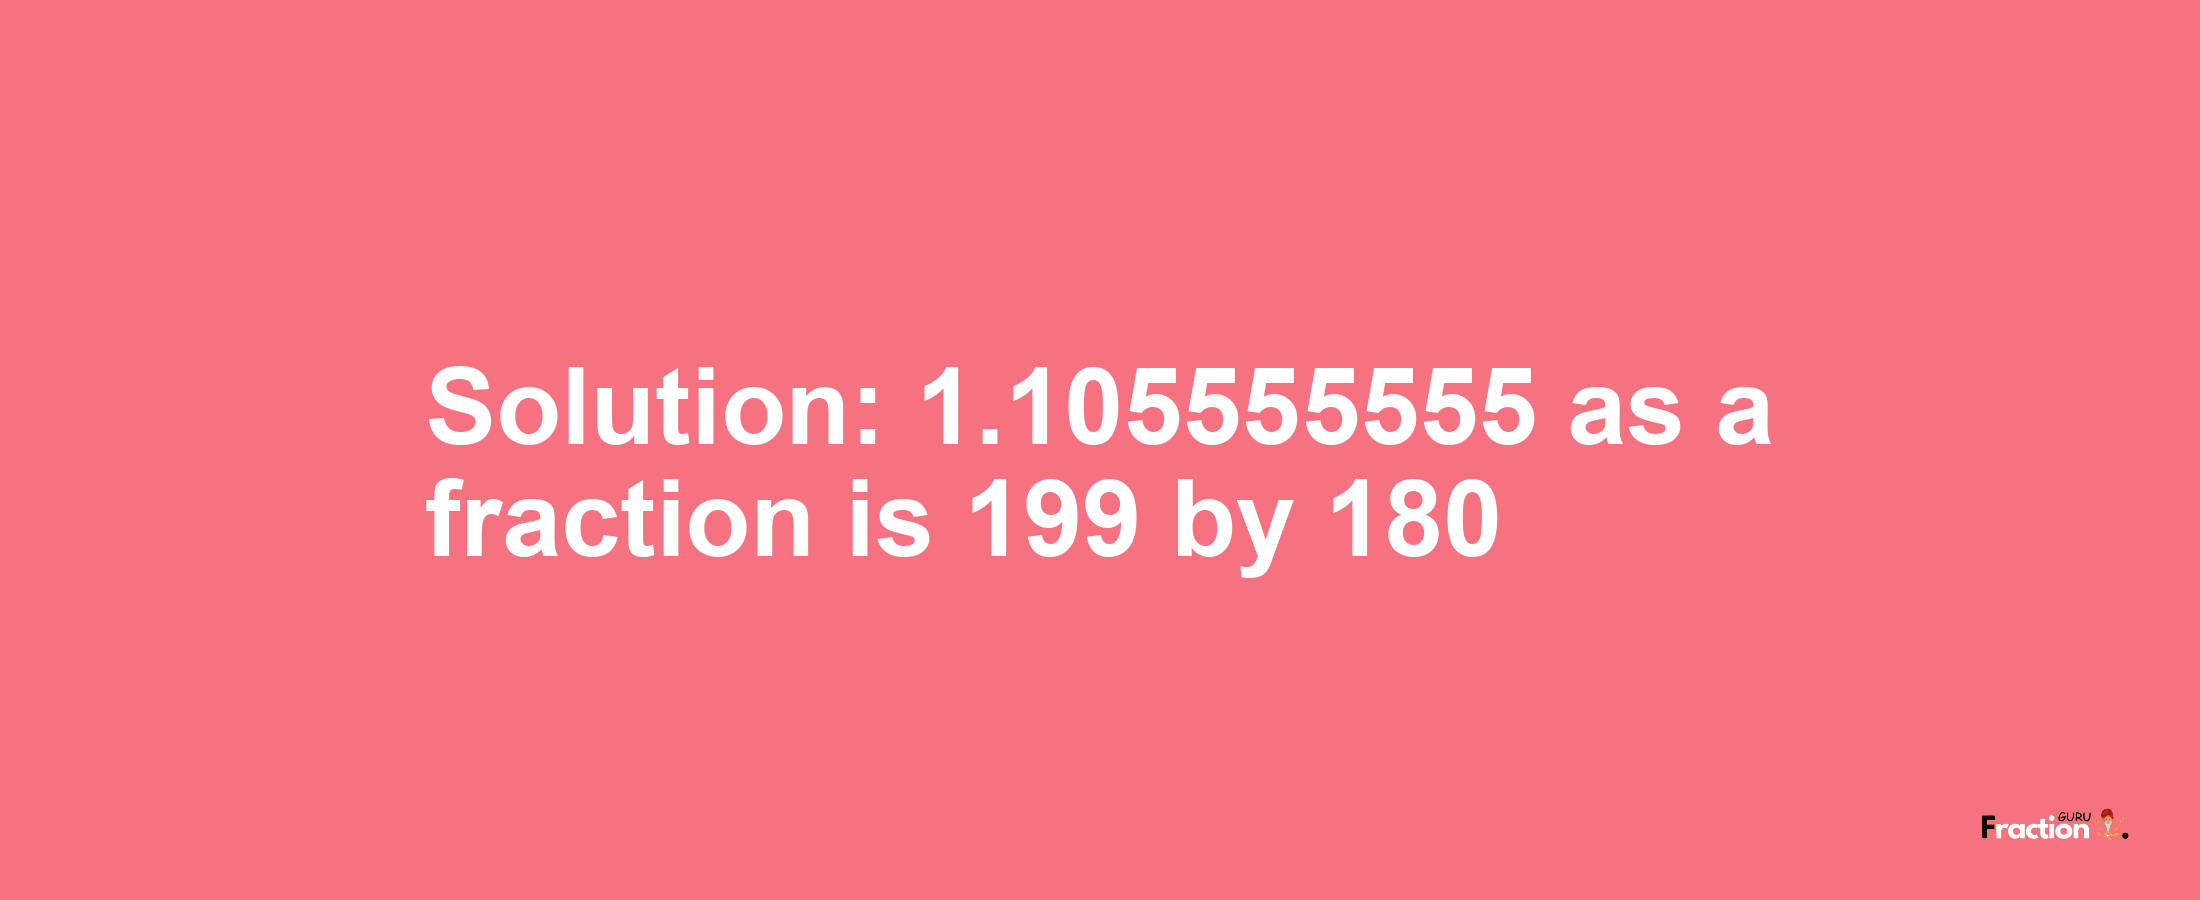 Solution:1.105555555 as a fraction is 199/180